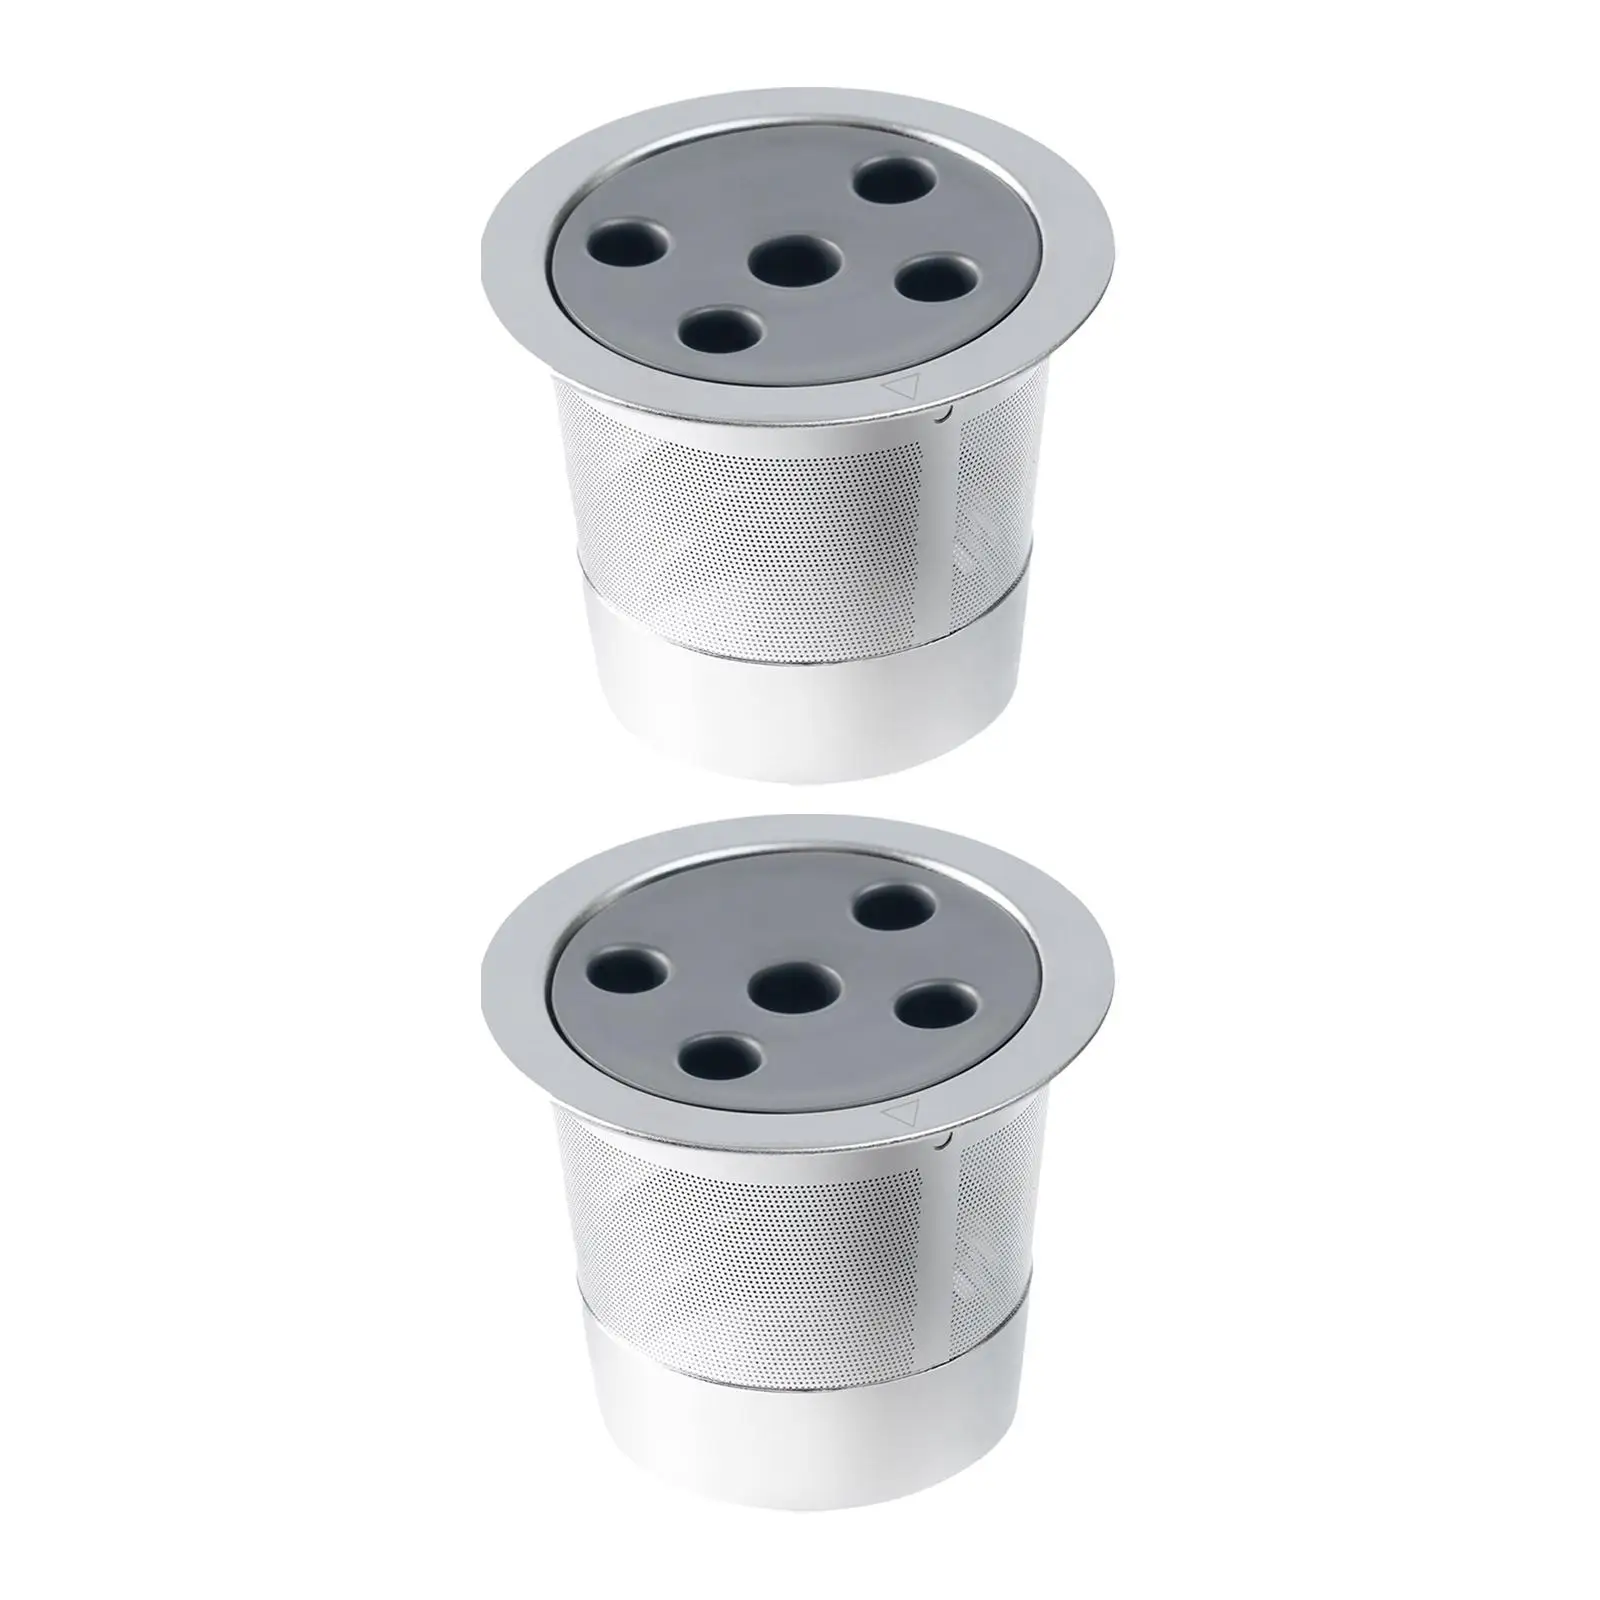 2x Reusable Coffee Filter with Lid Leakproof Stainless Steel Single Serve for Coffee Makers